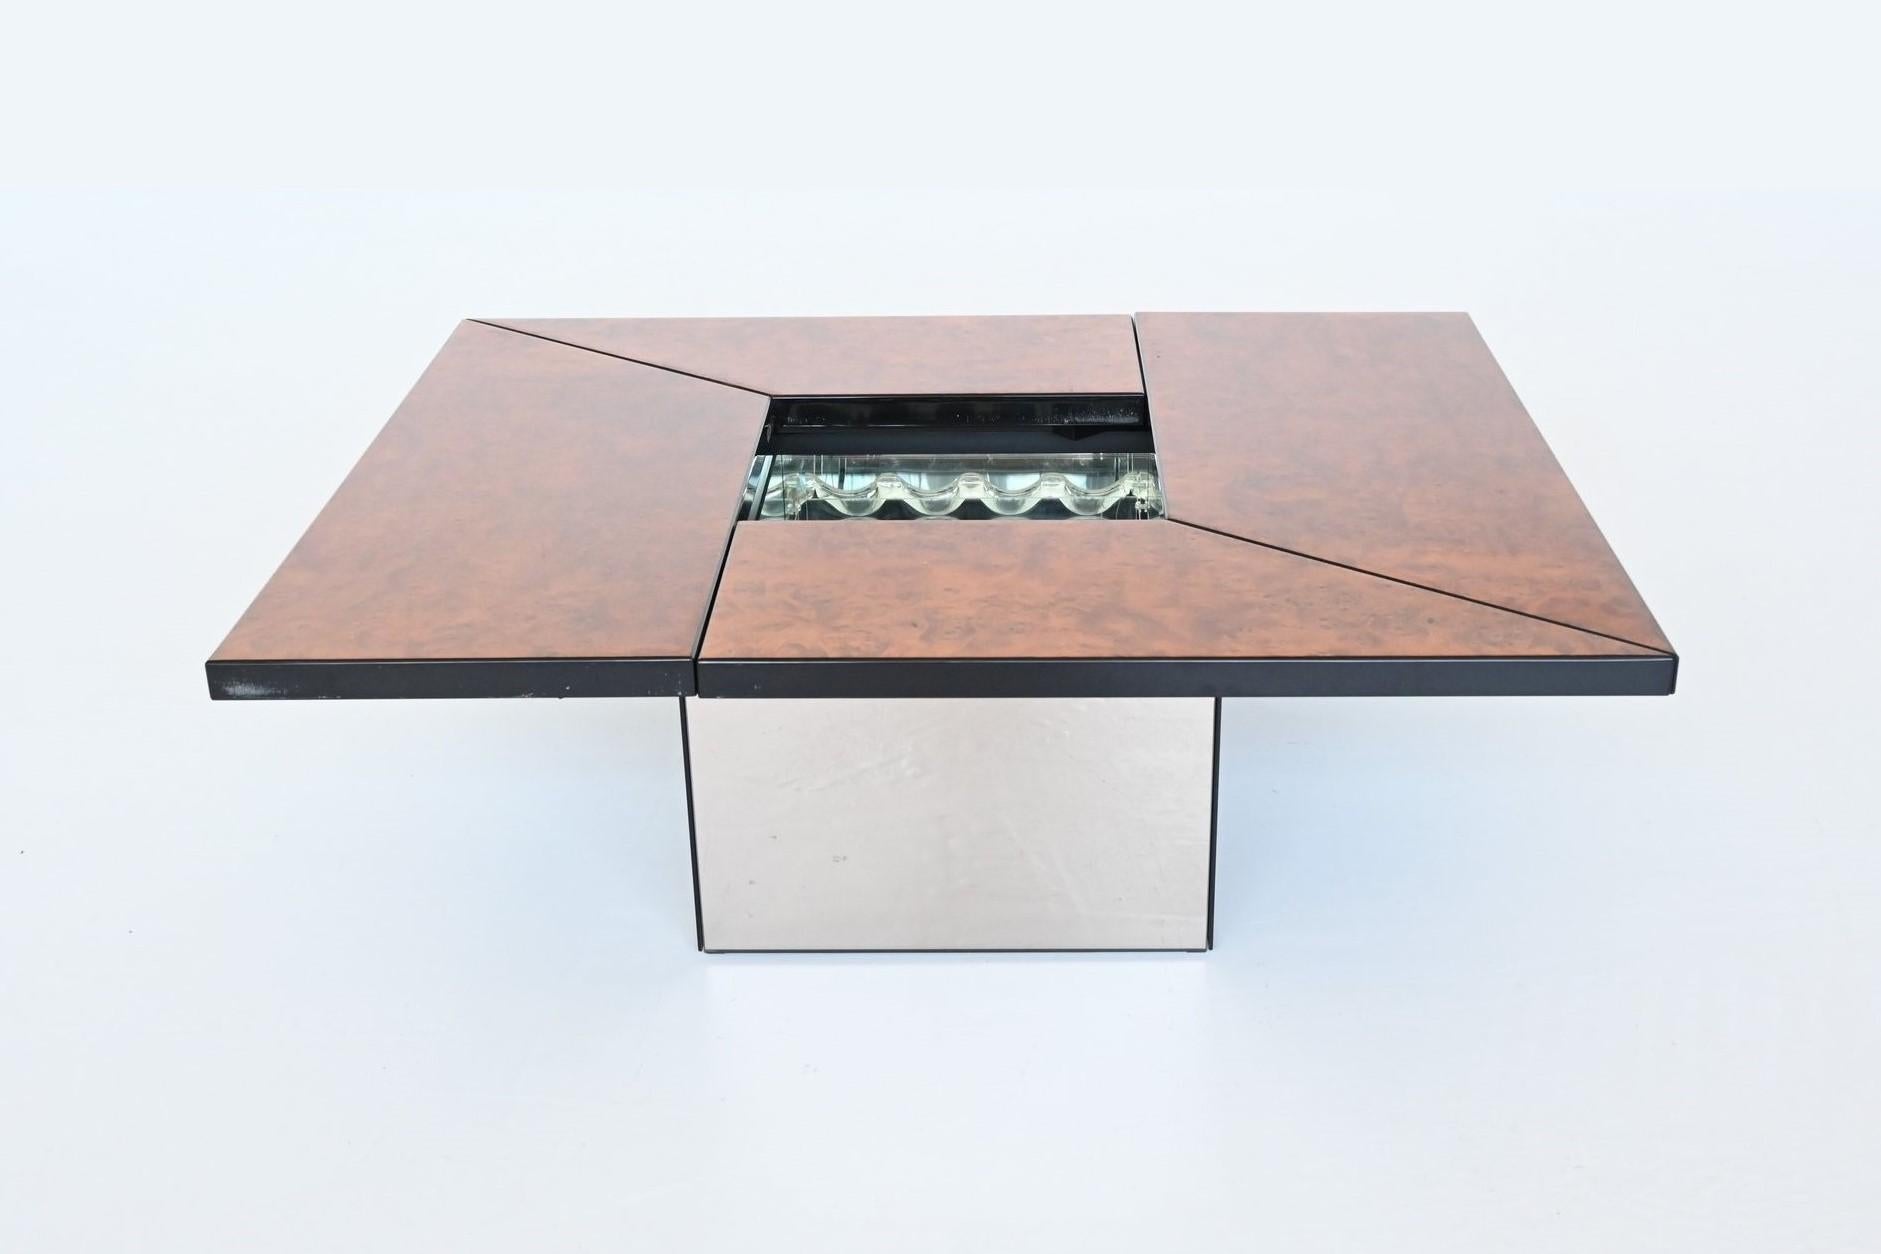 Super sophisticated stunning coffee table designed and manufactured by Paul Michel, France, 1970. This metamorphic coffee table is cleverly designed and slides smoothly open to reveal a mirrored spacious looking dry bar compartment, perfect spot to